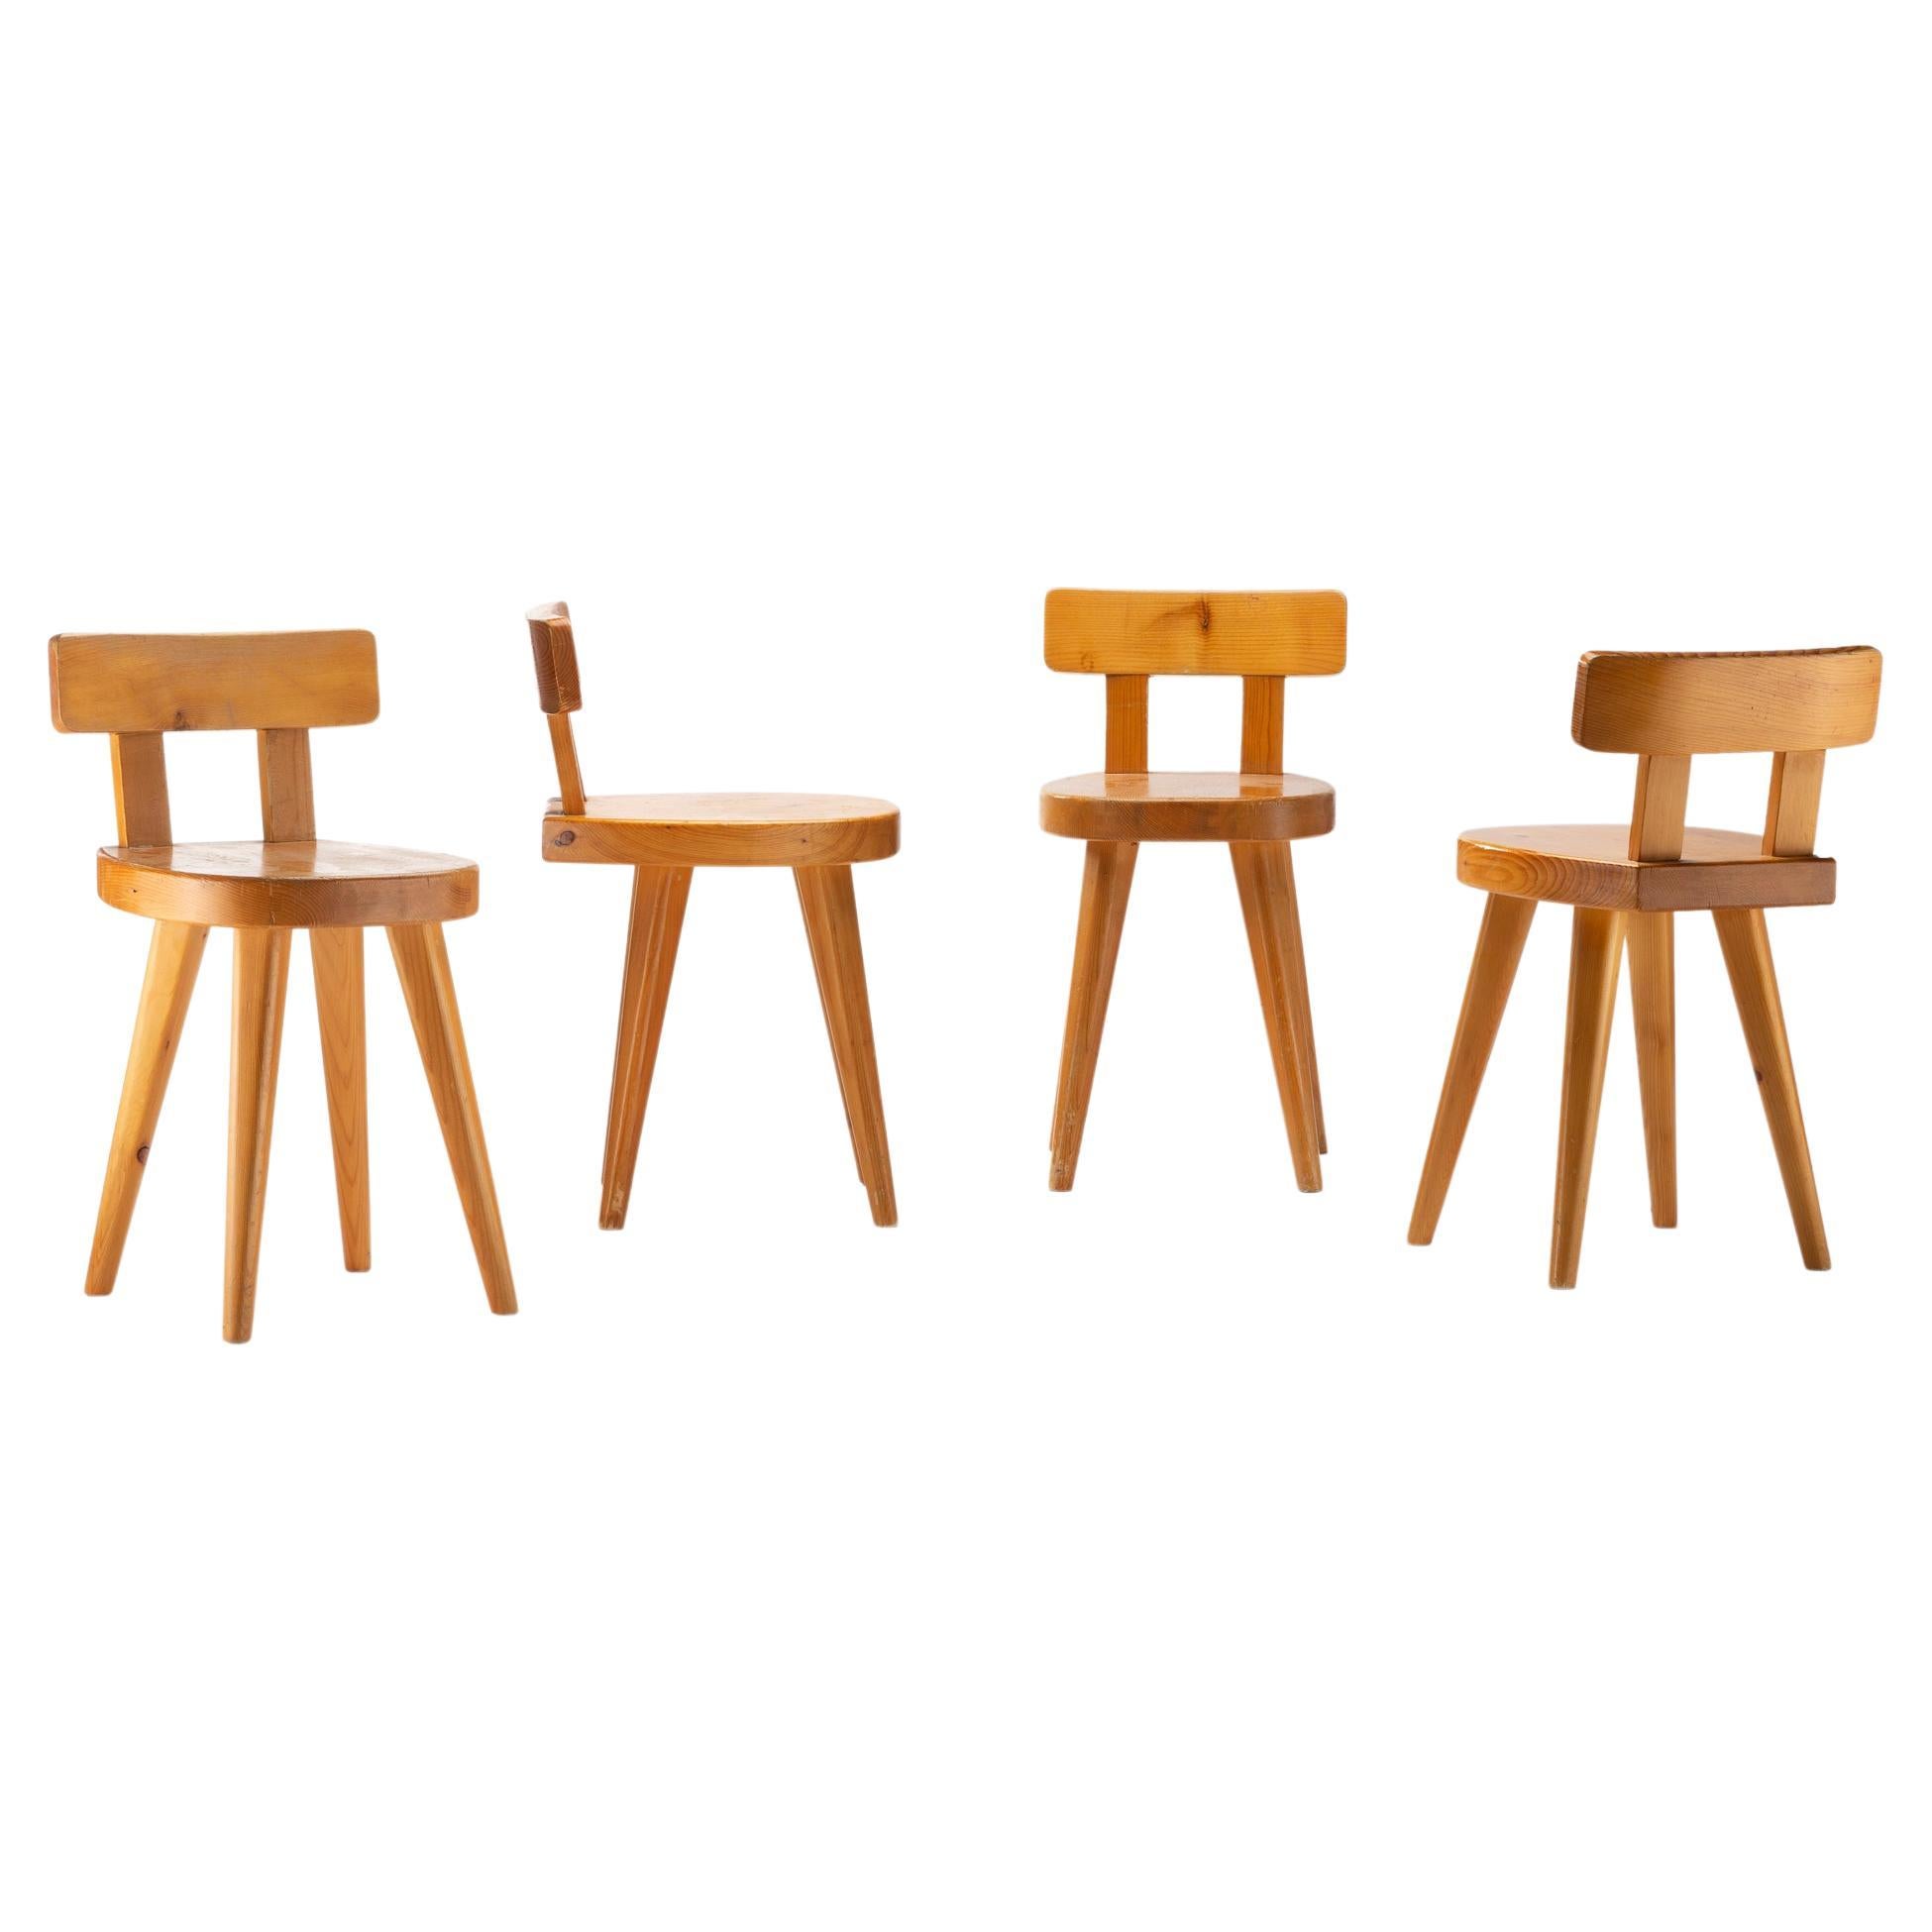 Set of Four Meribel Chairs by Christian Durupt For Sale